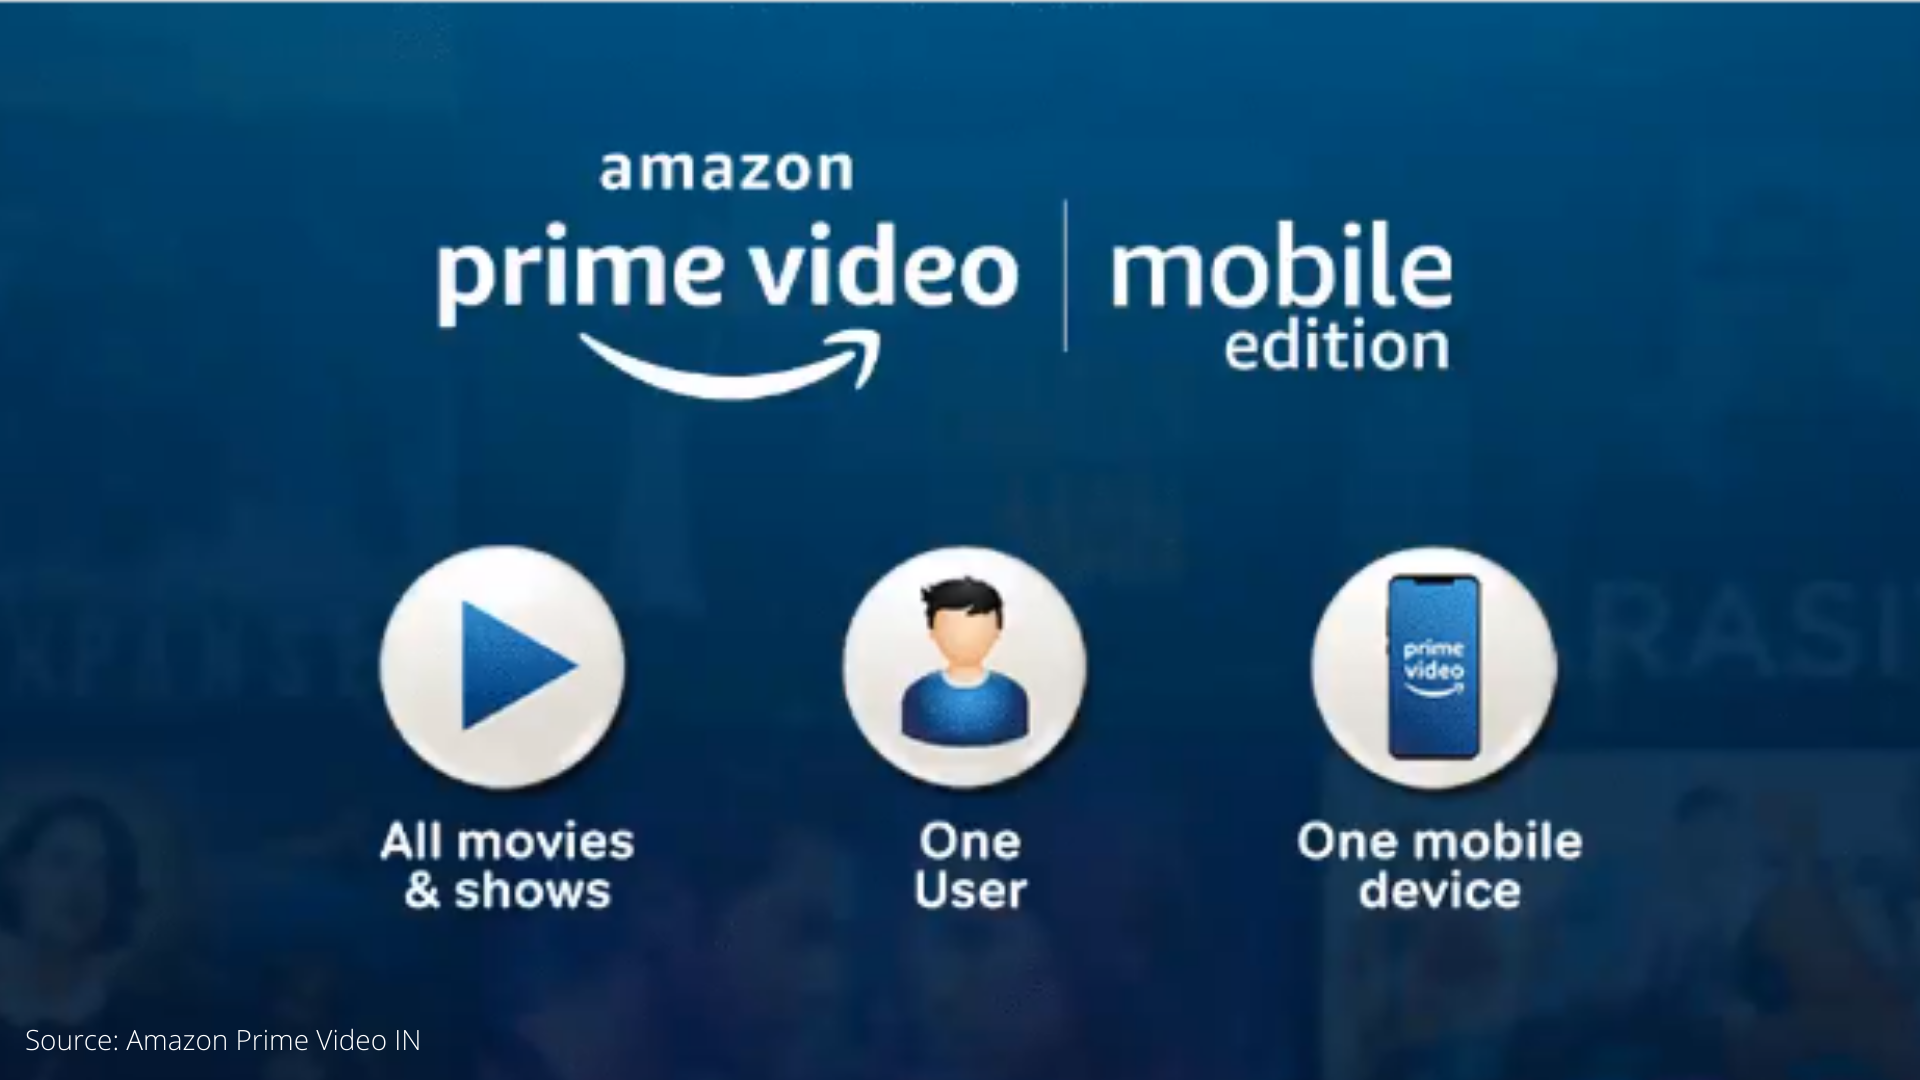 Amazon Launches Worldwide-first of Prime Video Mobile Edition in India